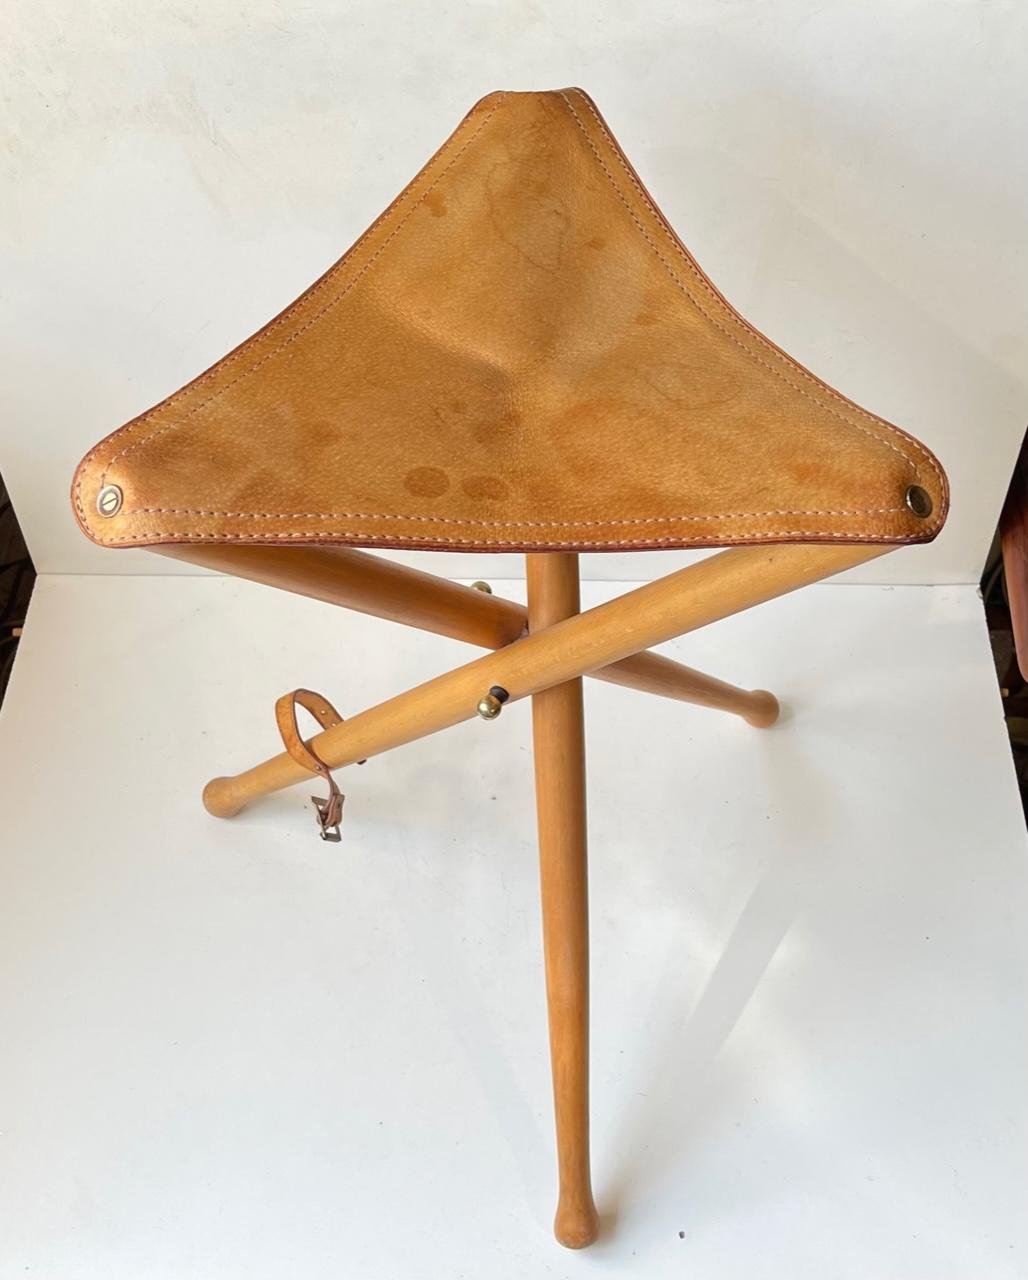 Vintage Scandinavian Tripod hunting stool with legs made of solid lacquered beech wood and a seat of thick tanned saddle leather. Manufactured in the 1960s or 70s. Measurements: H: 52 cm, W/D: 35/31 cm standing.